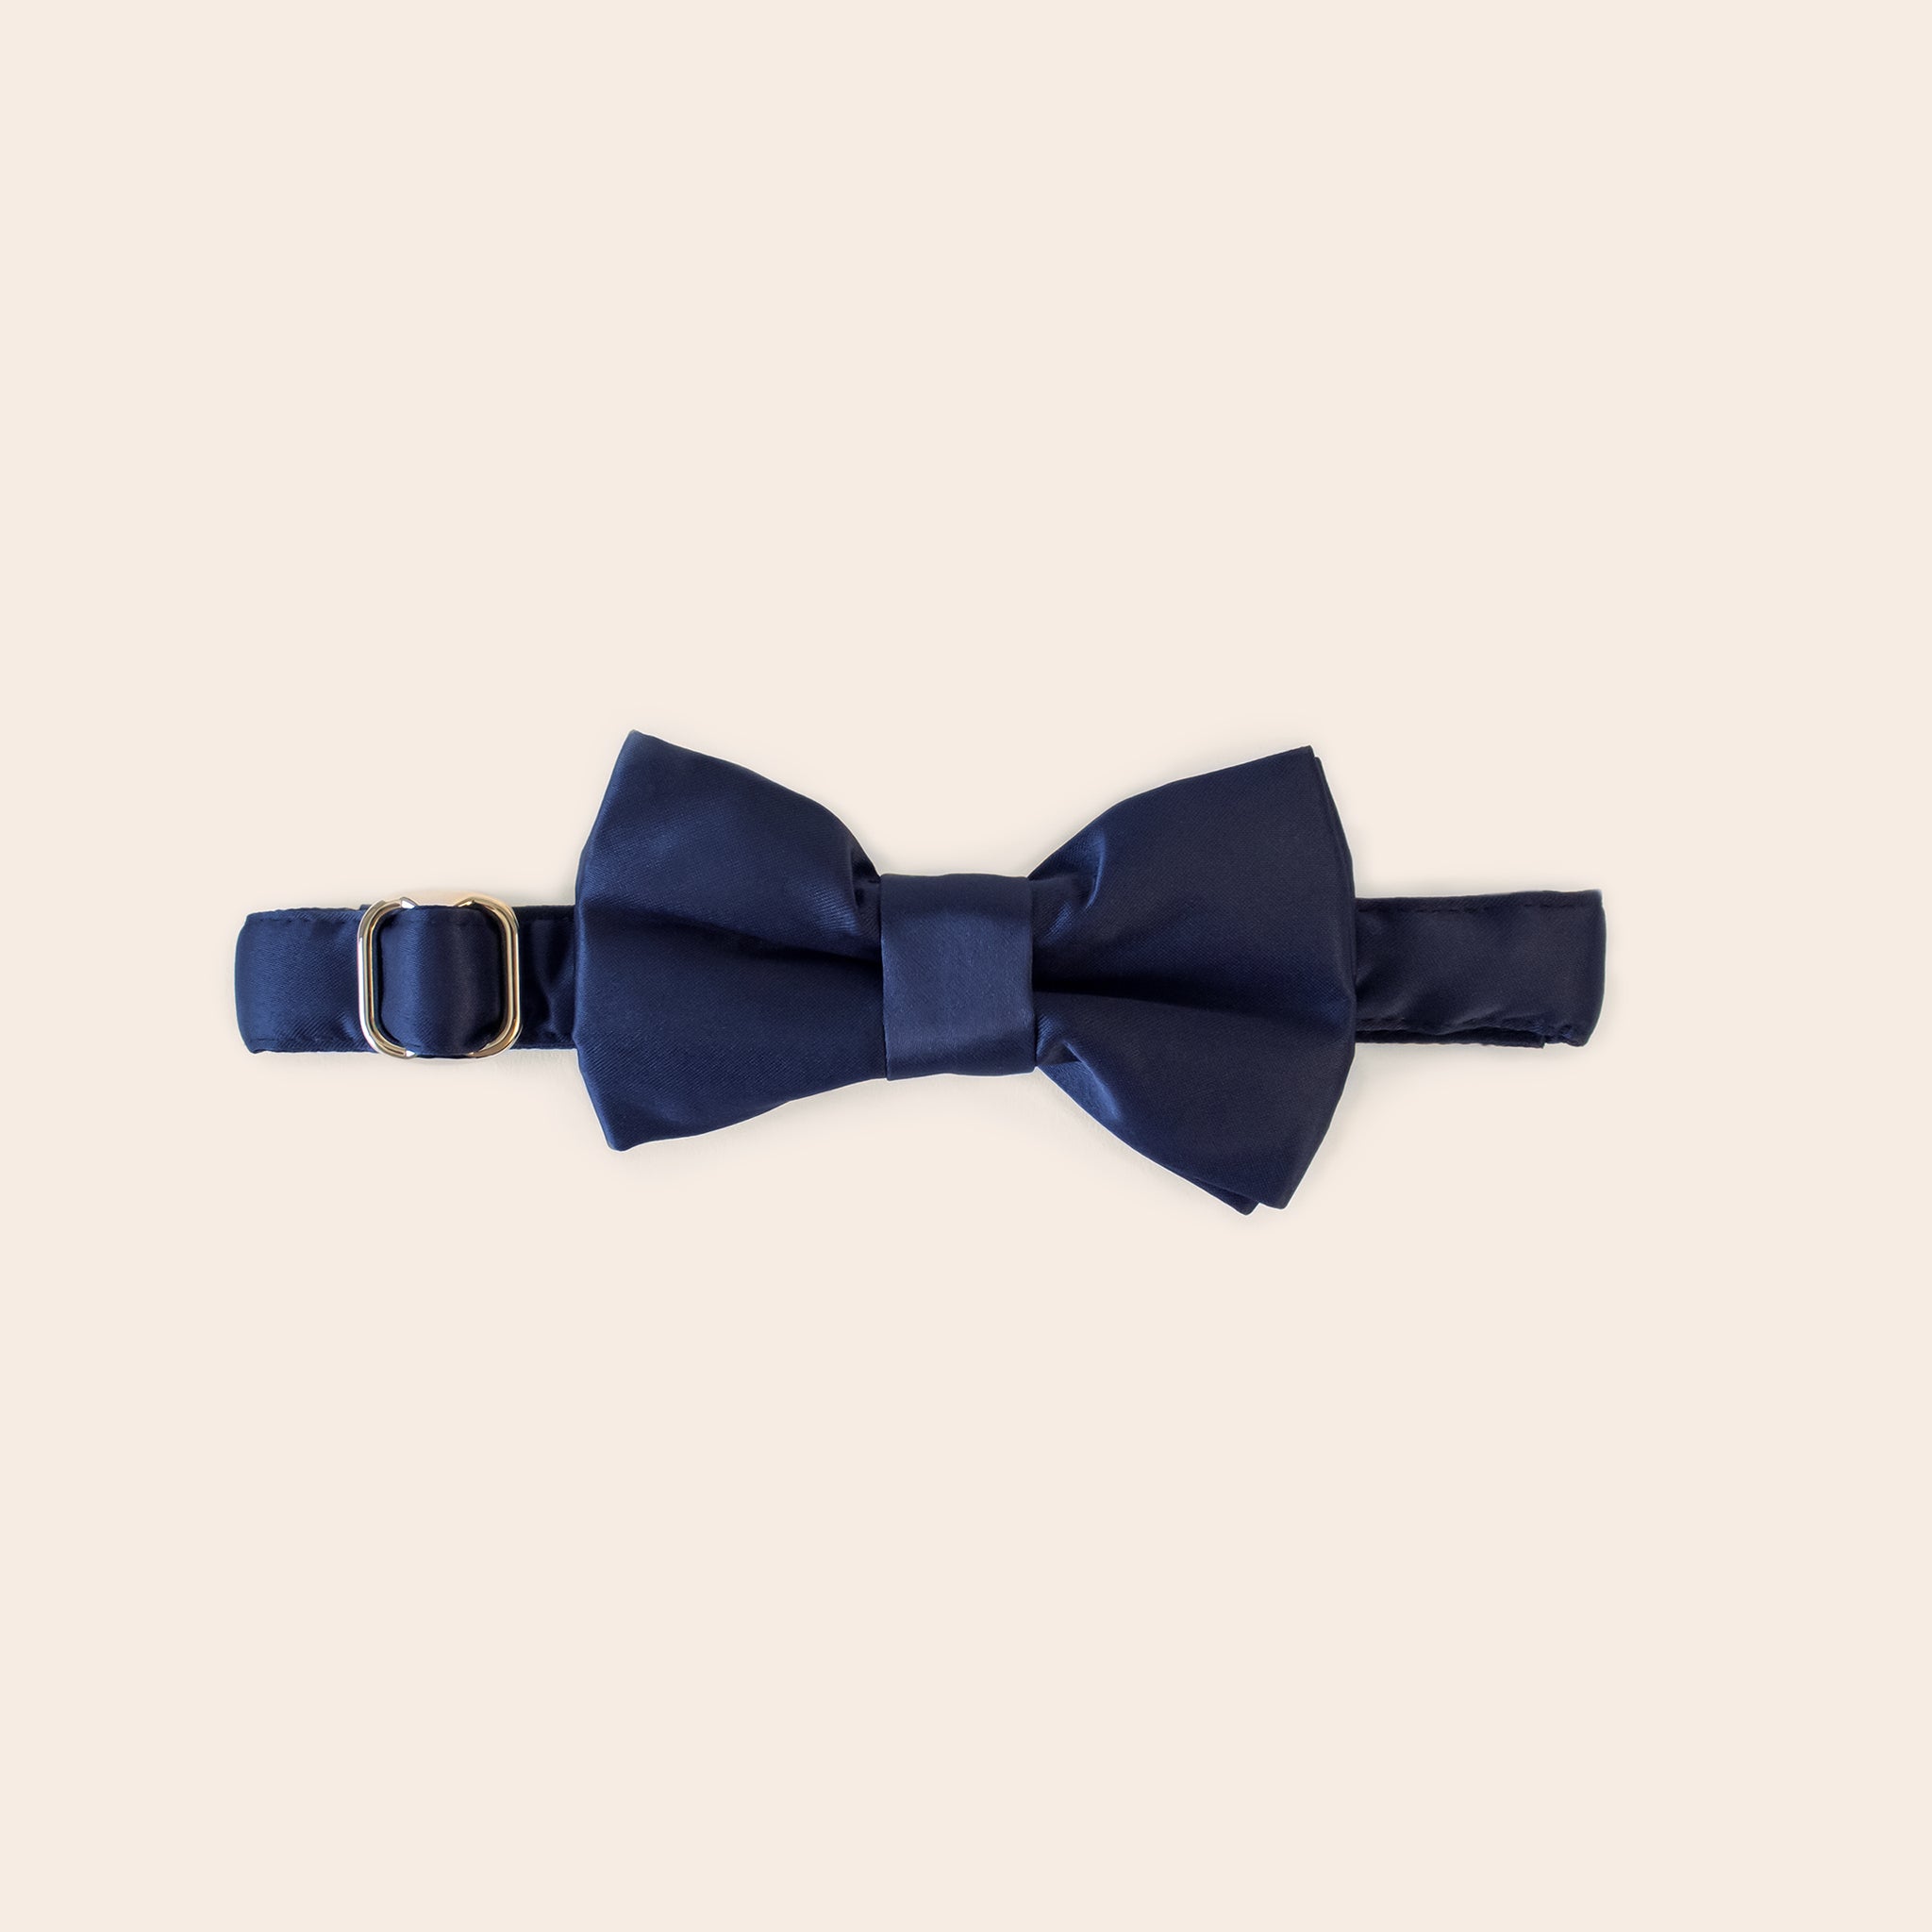 Muggsy Dog Bow Tie Collar in Navy by Birdy Grey, front view